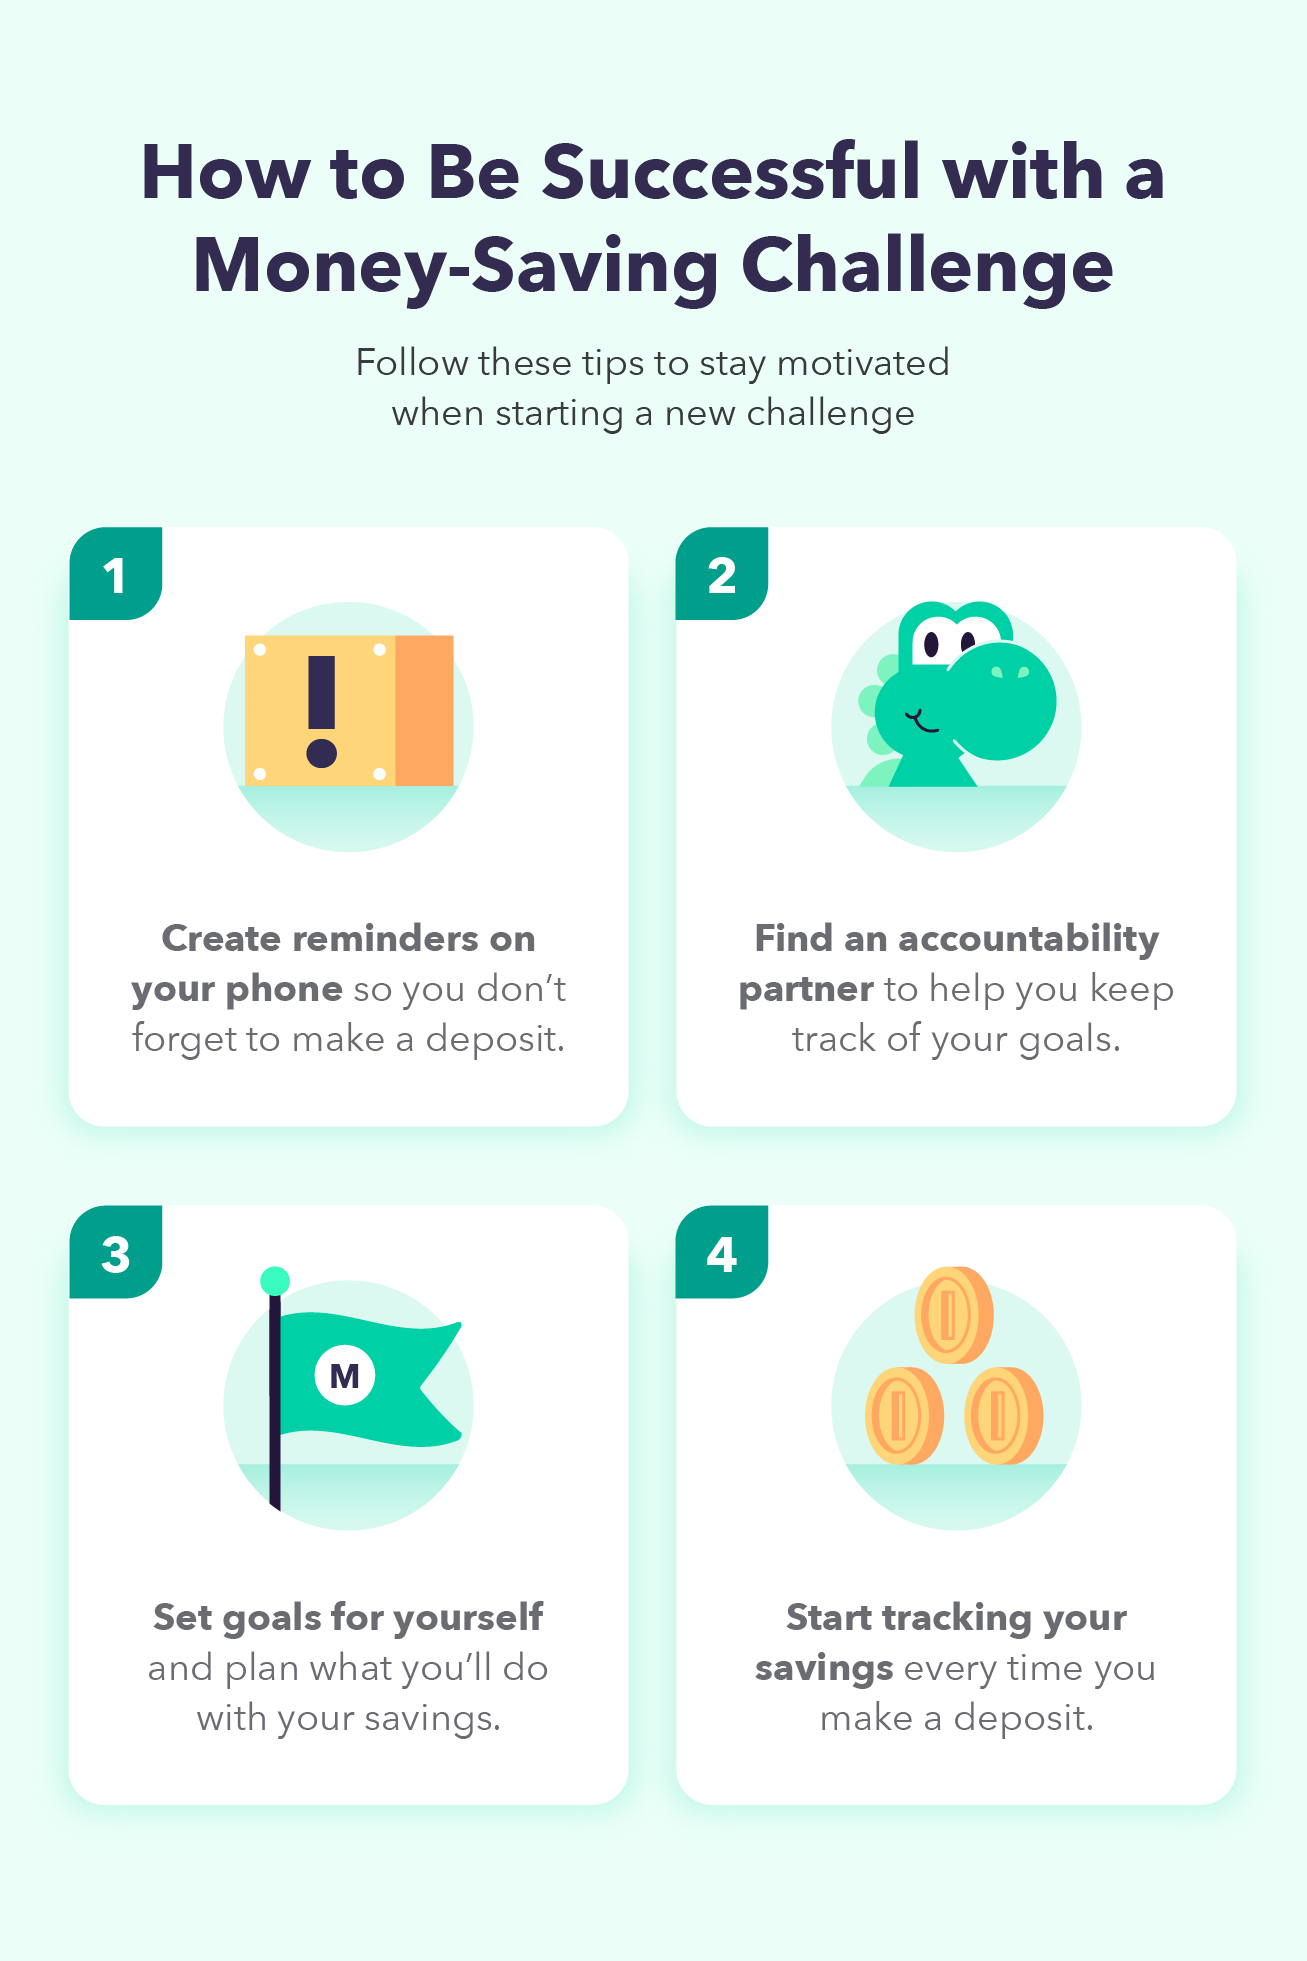 Four illustrations accompany tips for how to be successful when attempting a money-saving challenge.